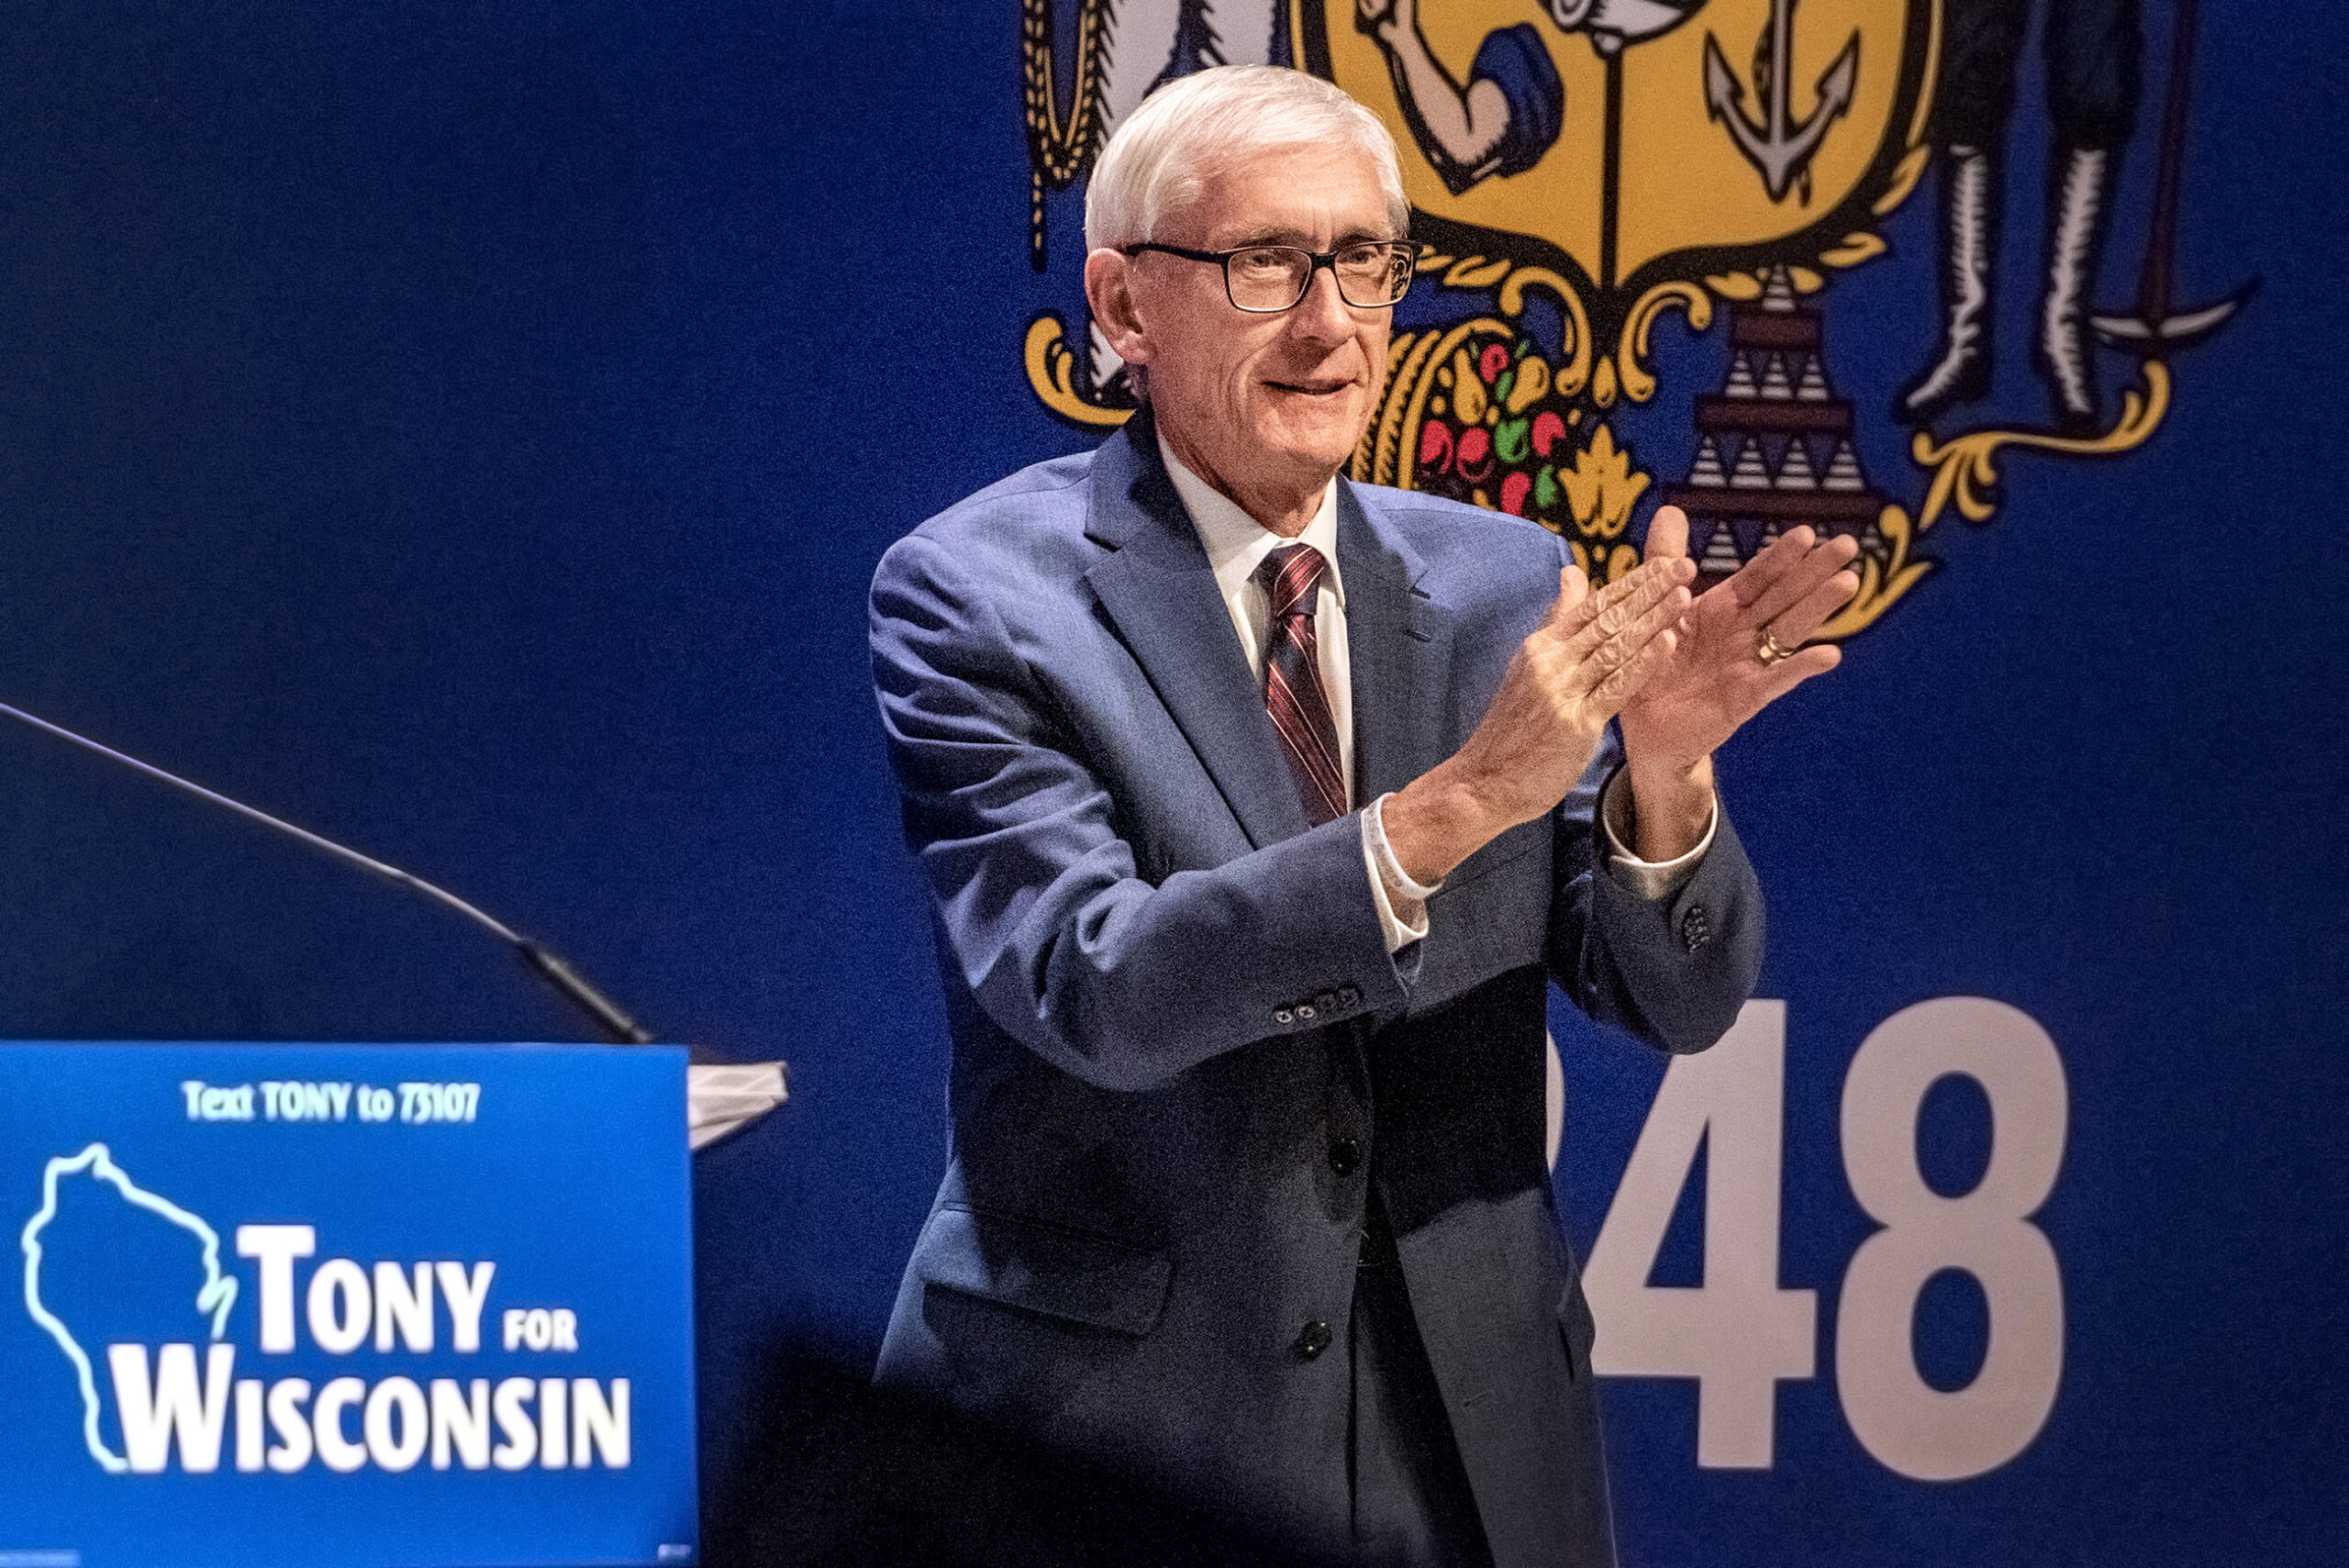 Tony Evers applauds while standing on a stage in front of a Wisconsin flag background.